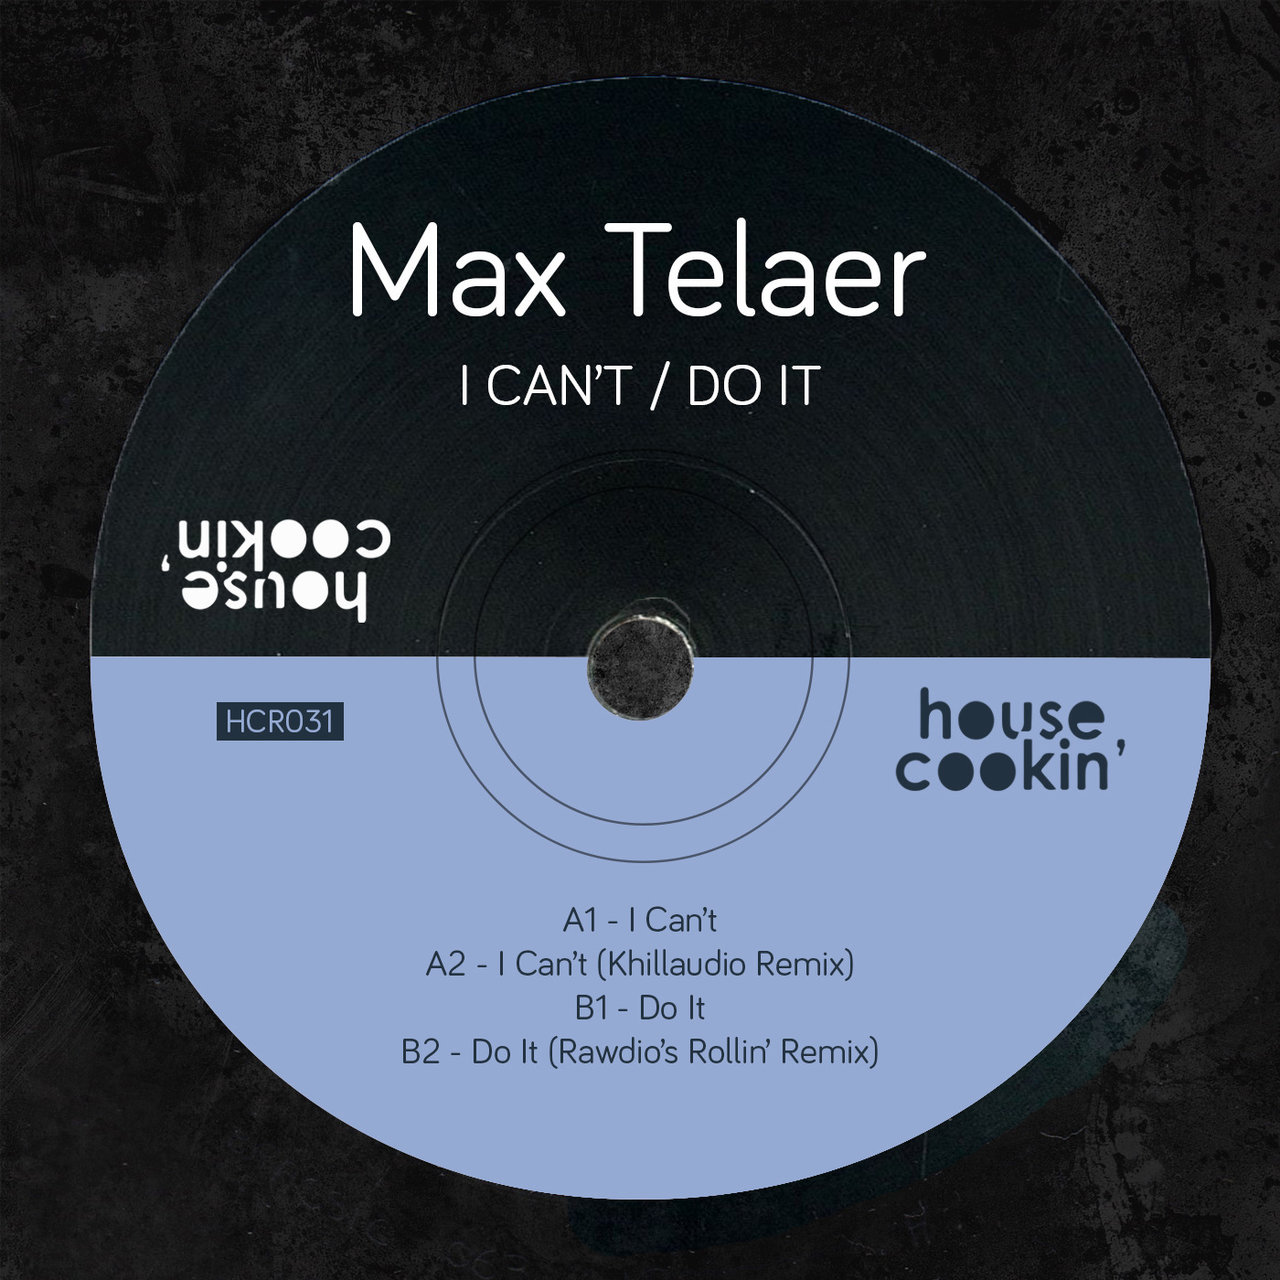 Max Telaer - I Can't / Do It / House Cookin